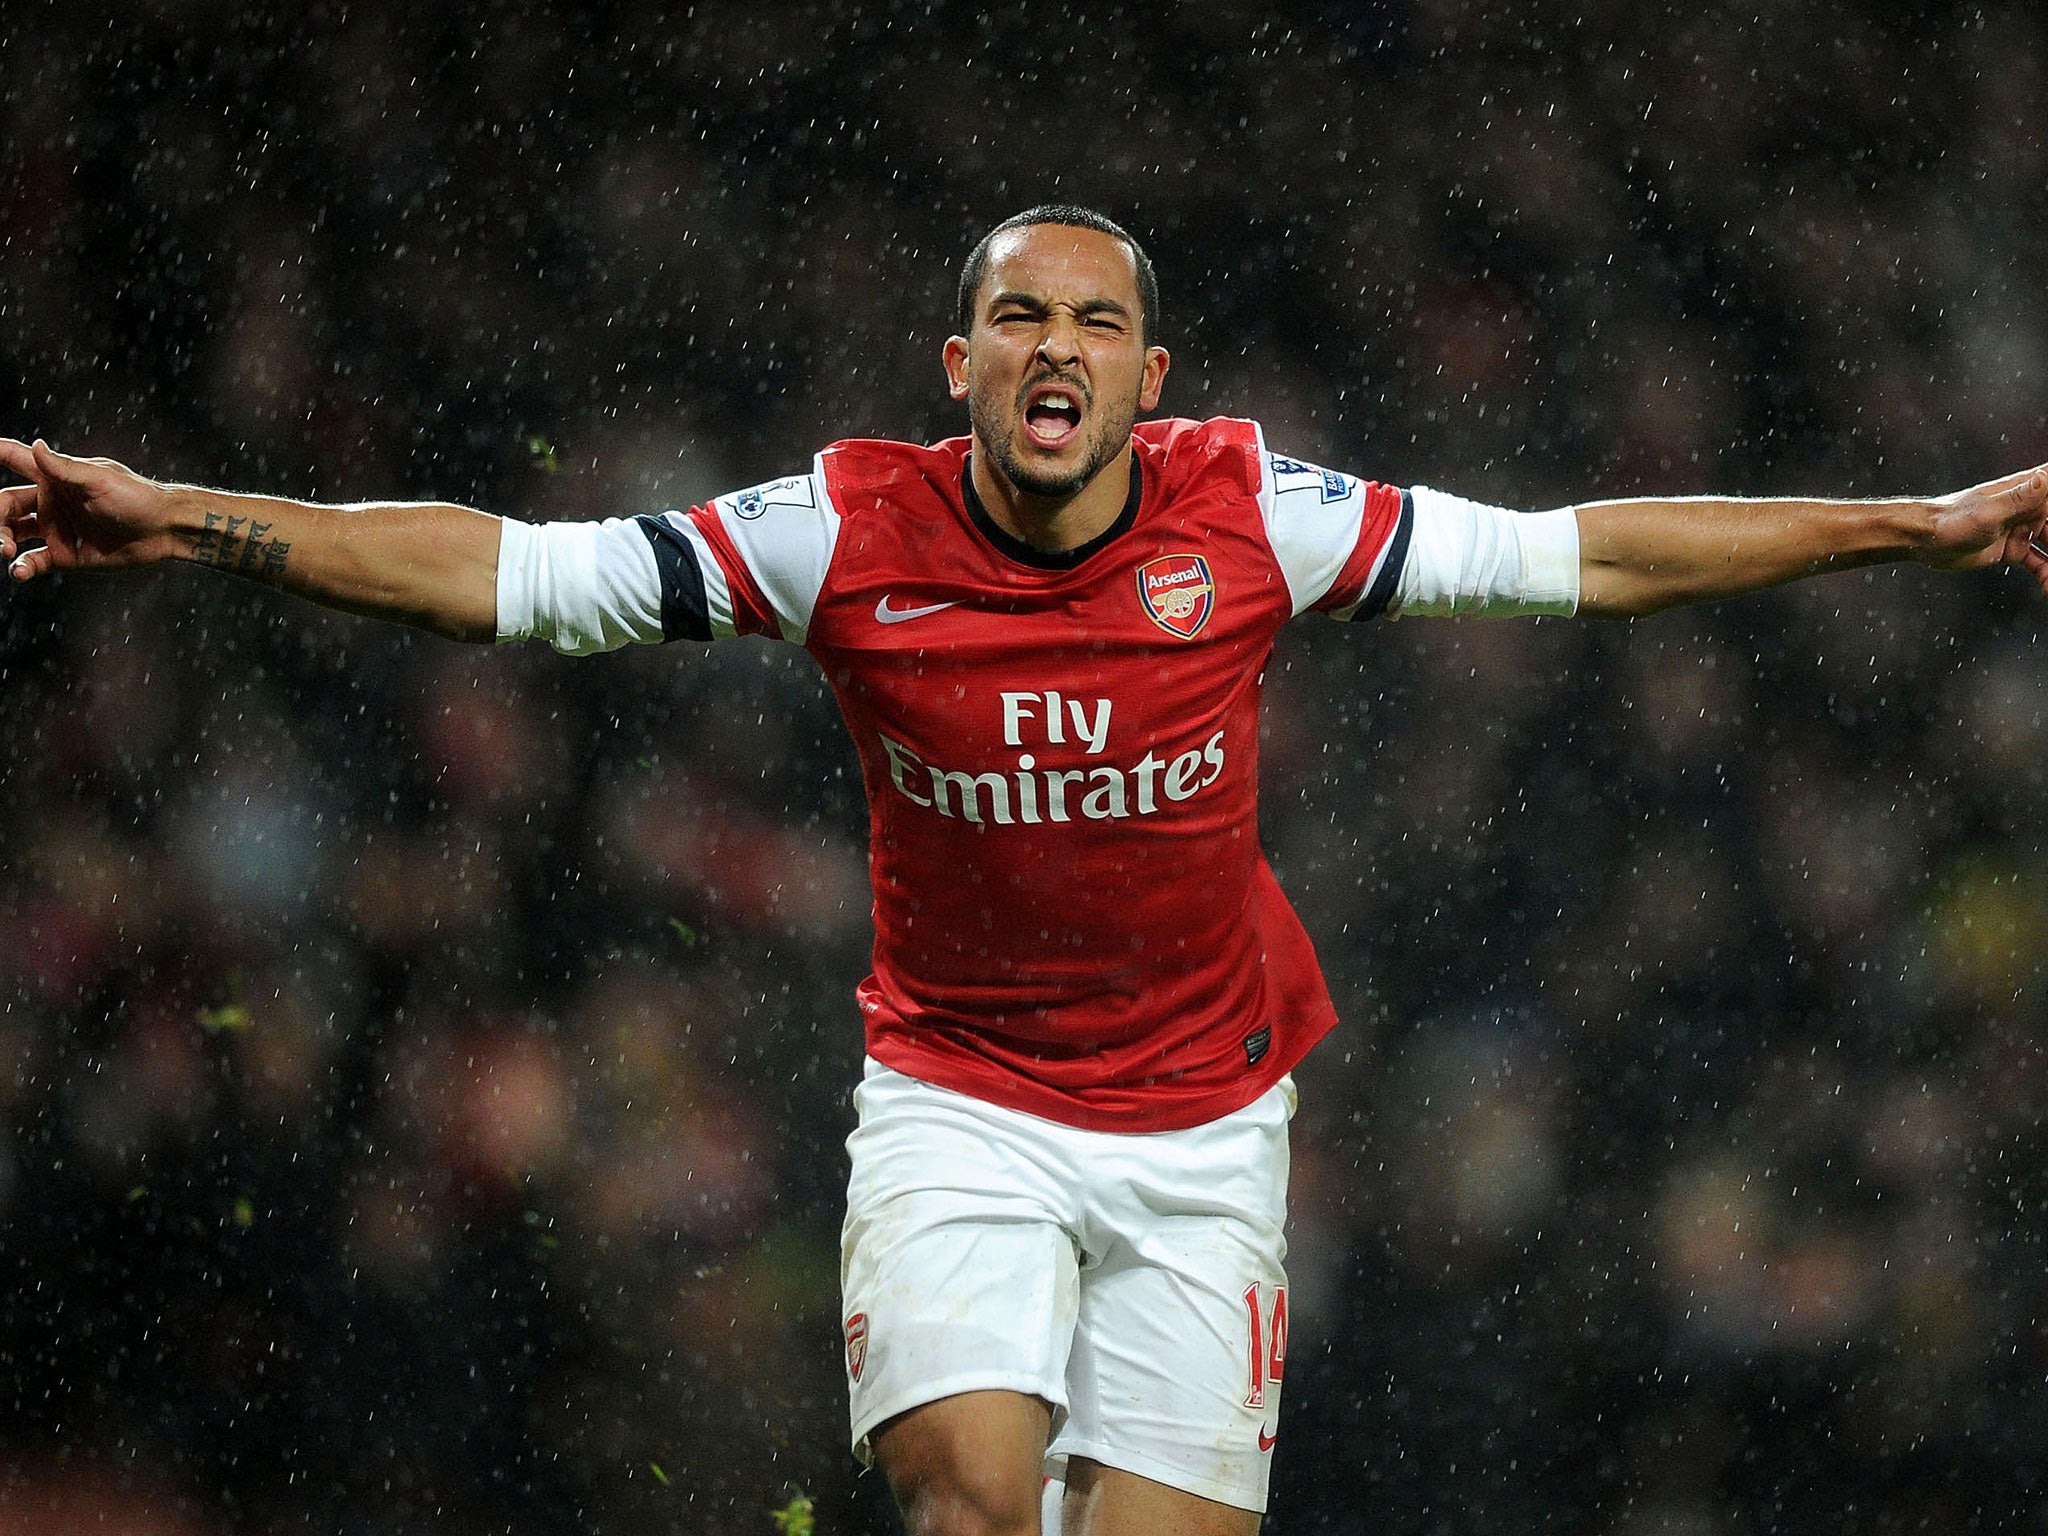 Theo Walcott celebrates after scoring the second goal in the 2-0 victory over Cardiff City